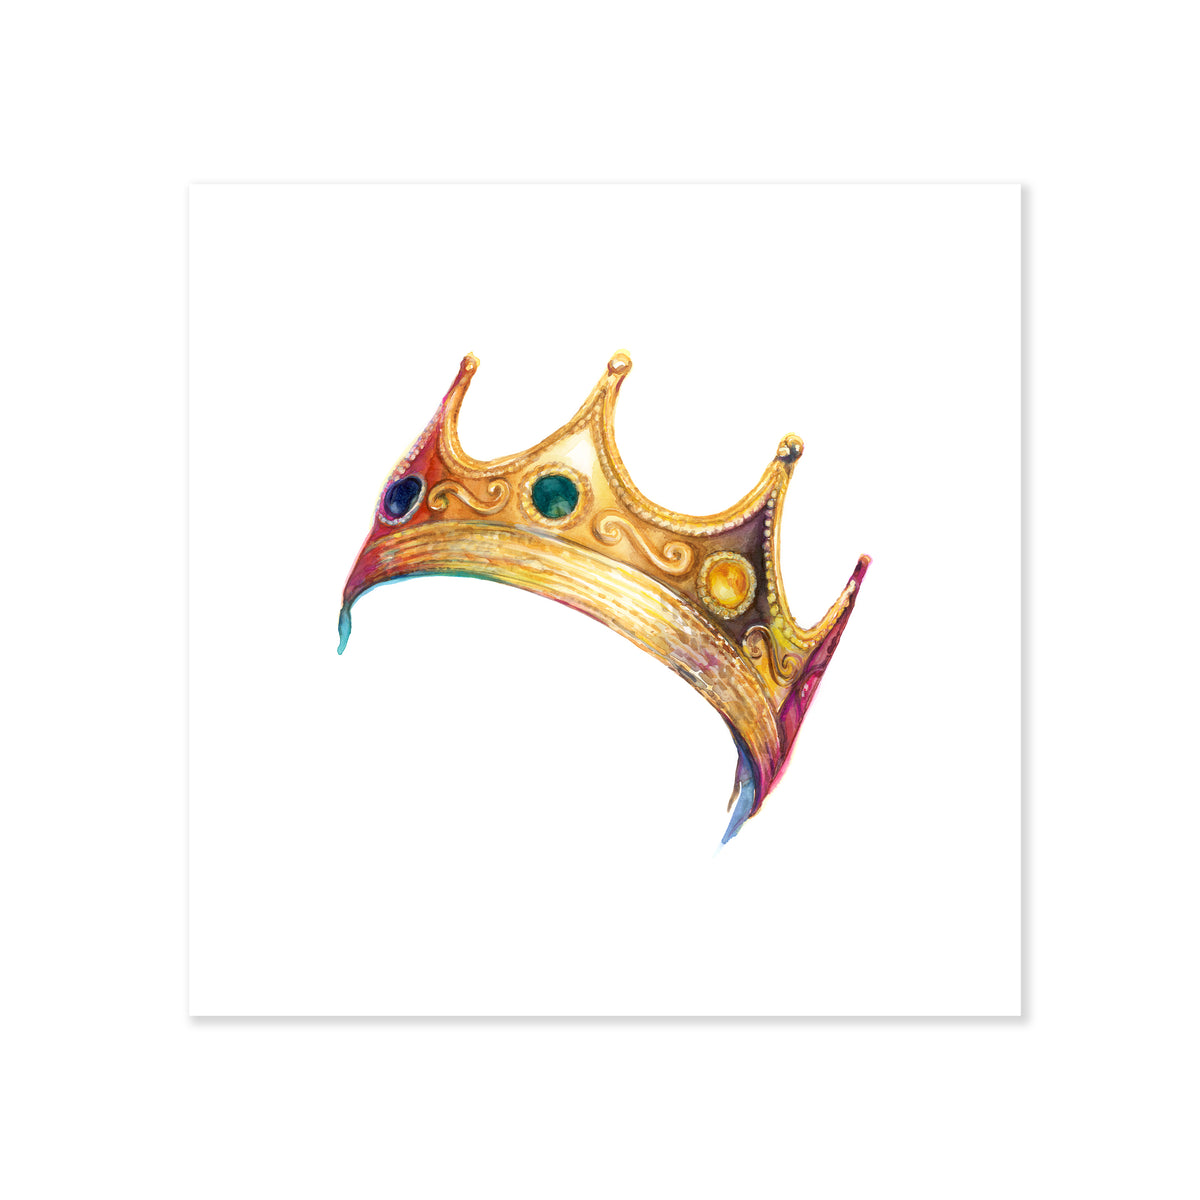 a fine art print illustrating a right tilting gold crown with four spikes and four jewels in the colors navy green yellow and red drawn in watercolor on a soft white background